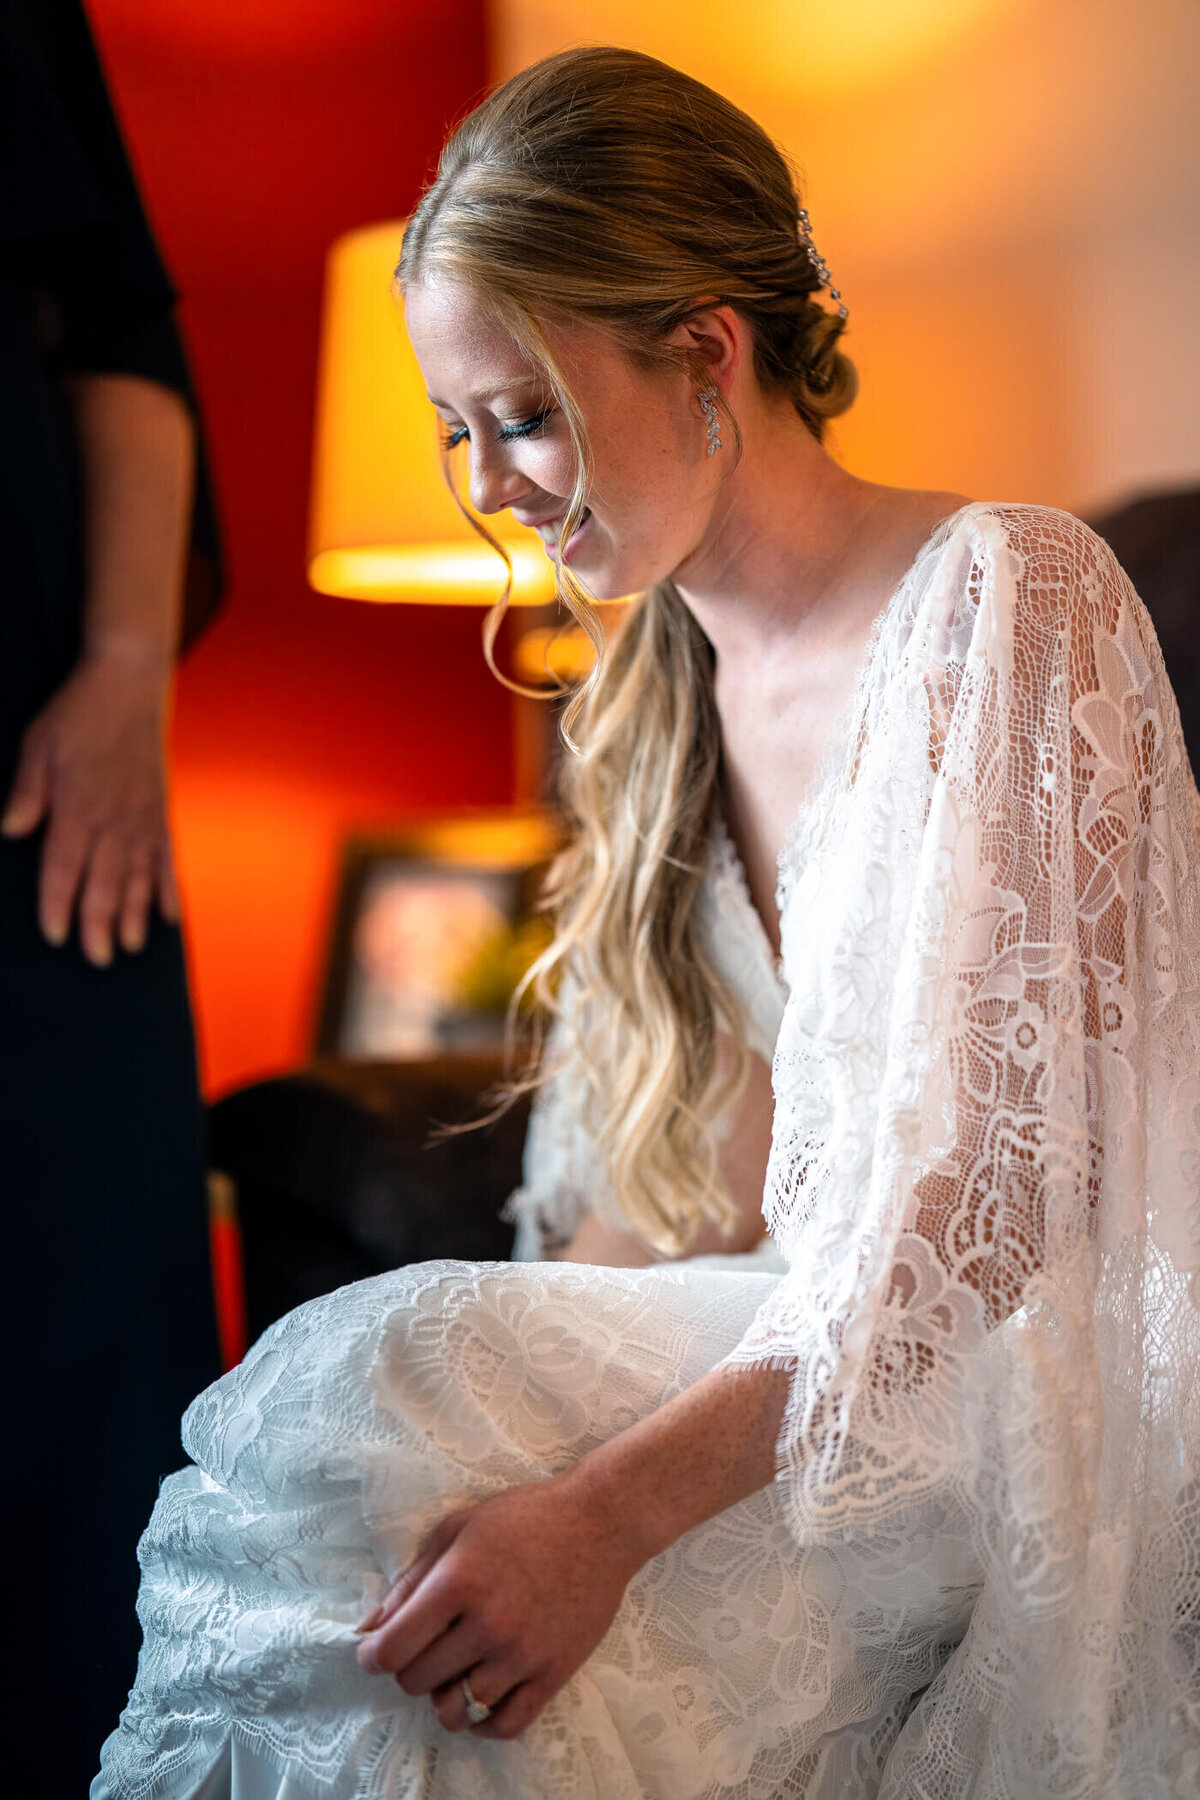 Candid Pittsburgh wedding photography of bride getting ready the morning of her wedding in Pittsburgh, PA.